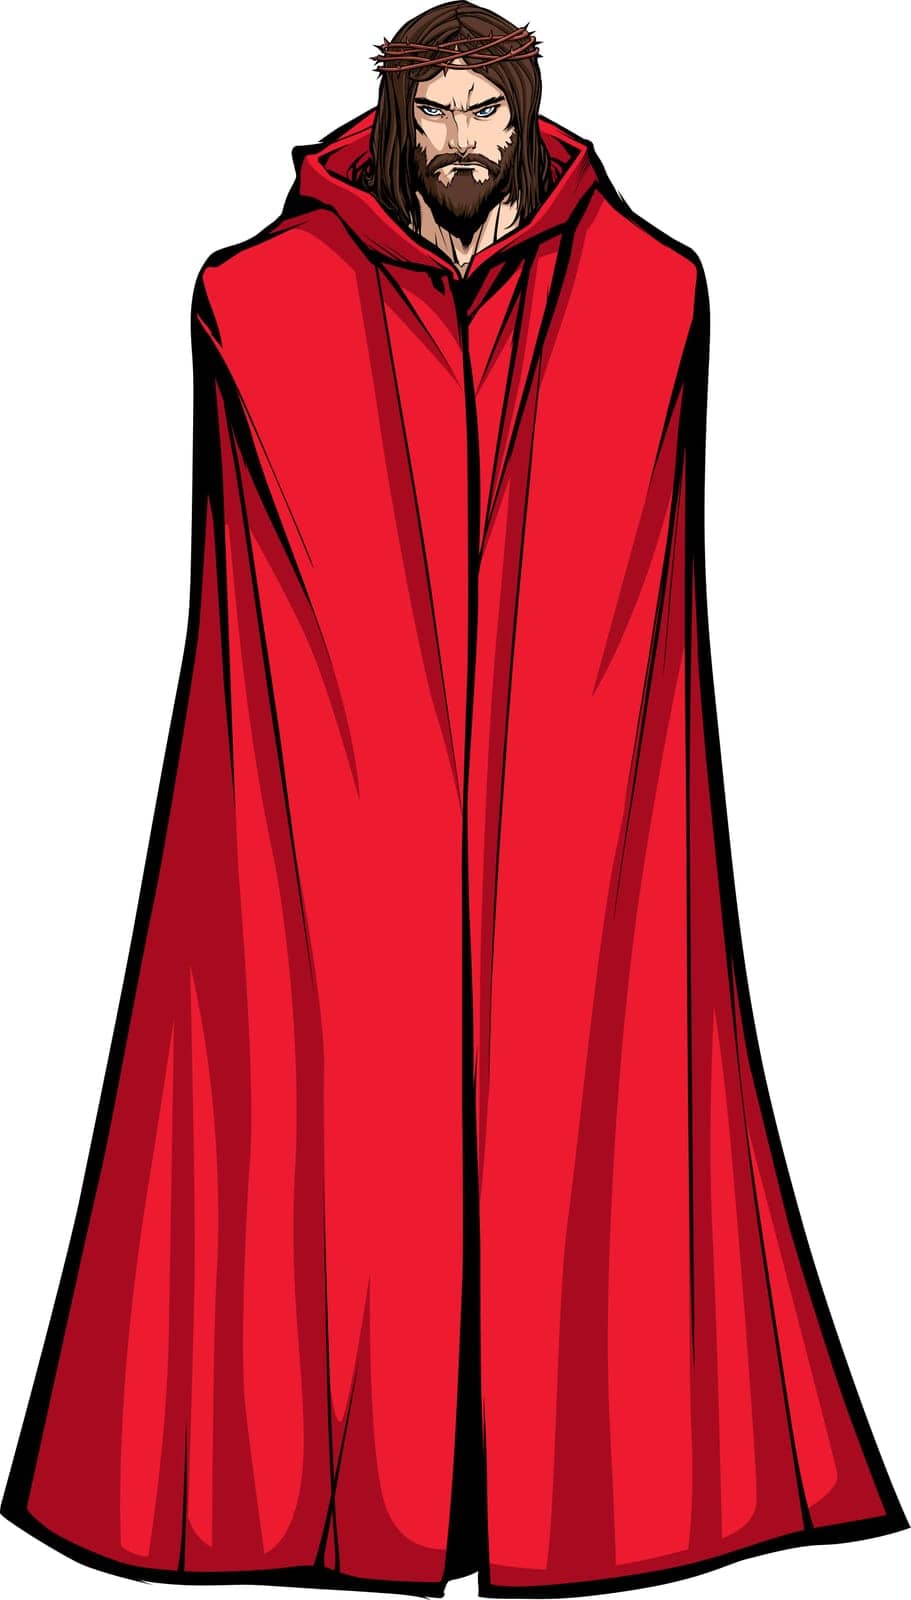 Full length illustration of Jesus Christ wearing red cloak and looking at you with serious expression.